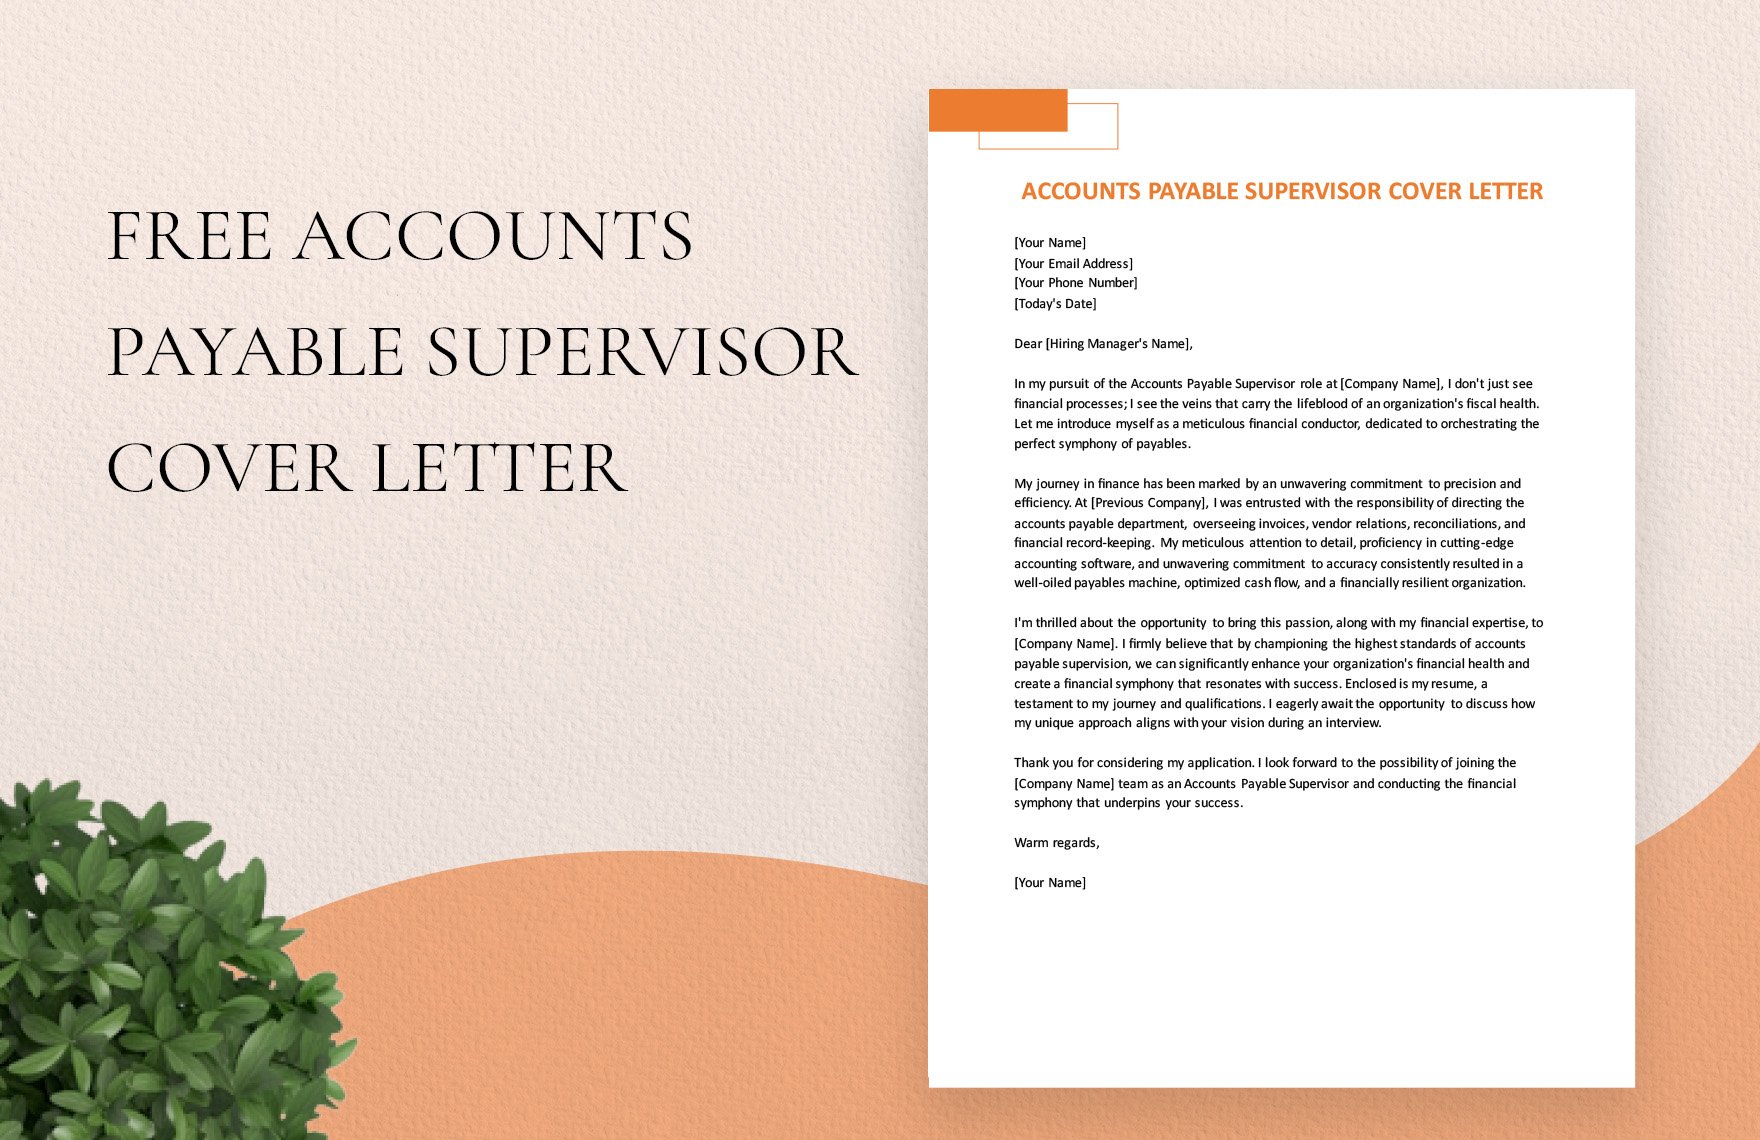 Accounts Payable Supervisor Cover Letter